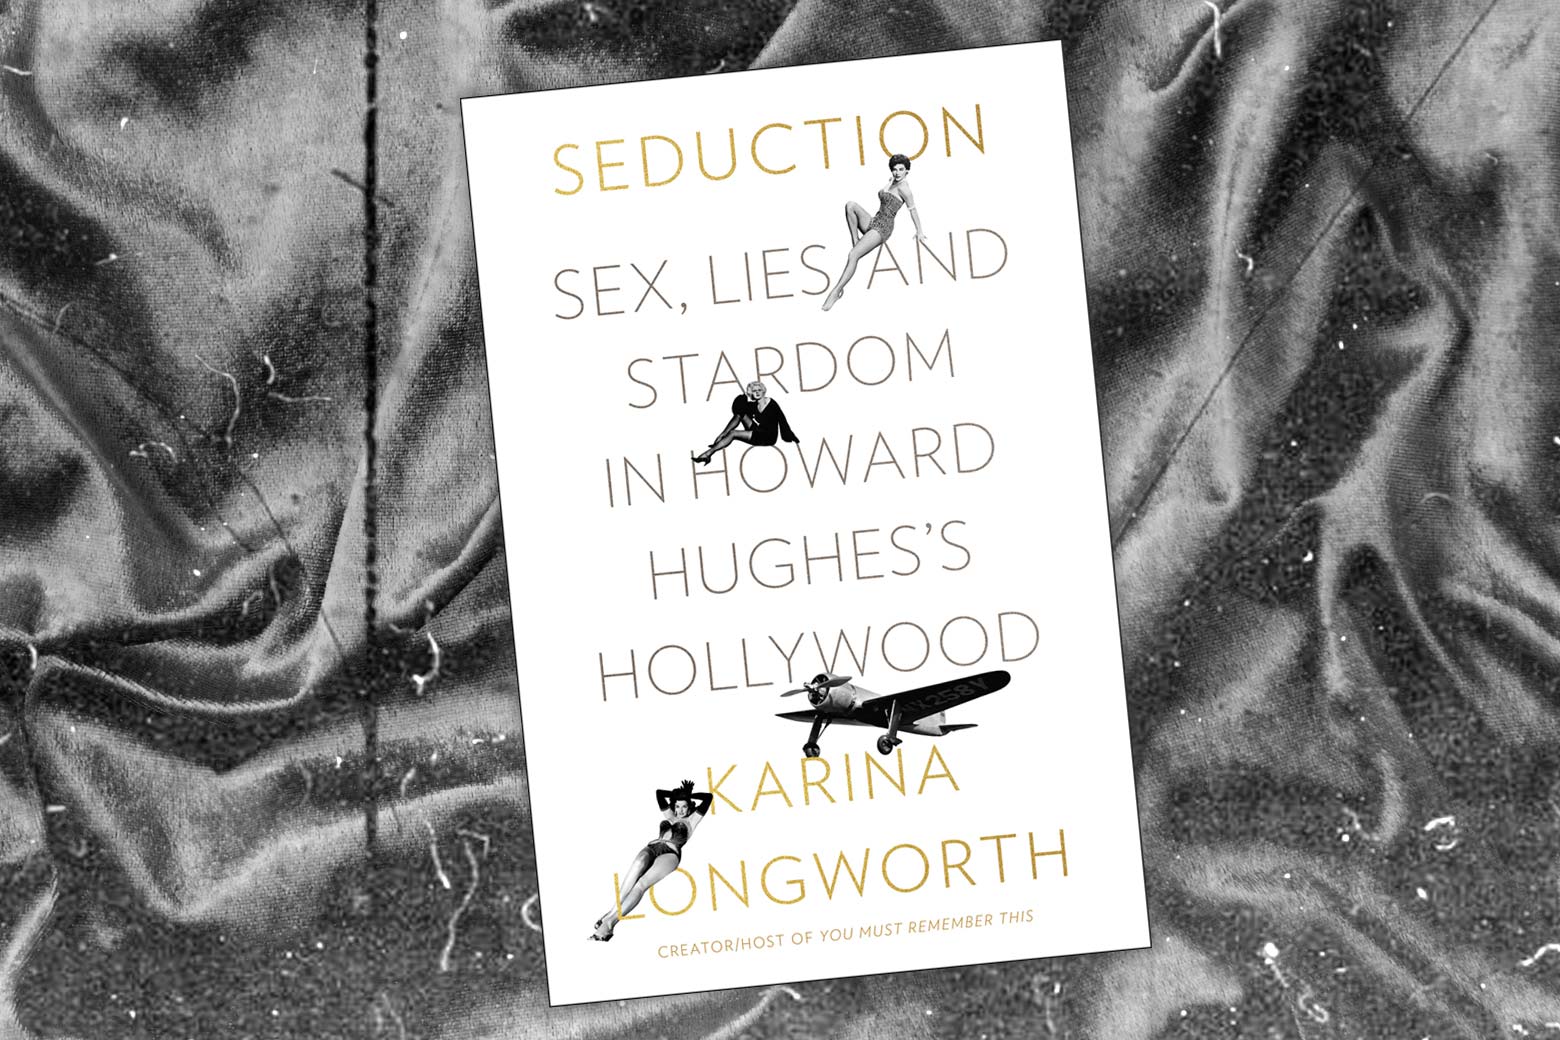 The cover of the book Seduction: Sex, Lies, and Stardom in Howard Hughes's Hollywood.